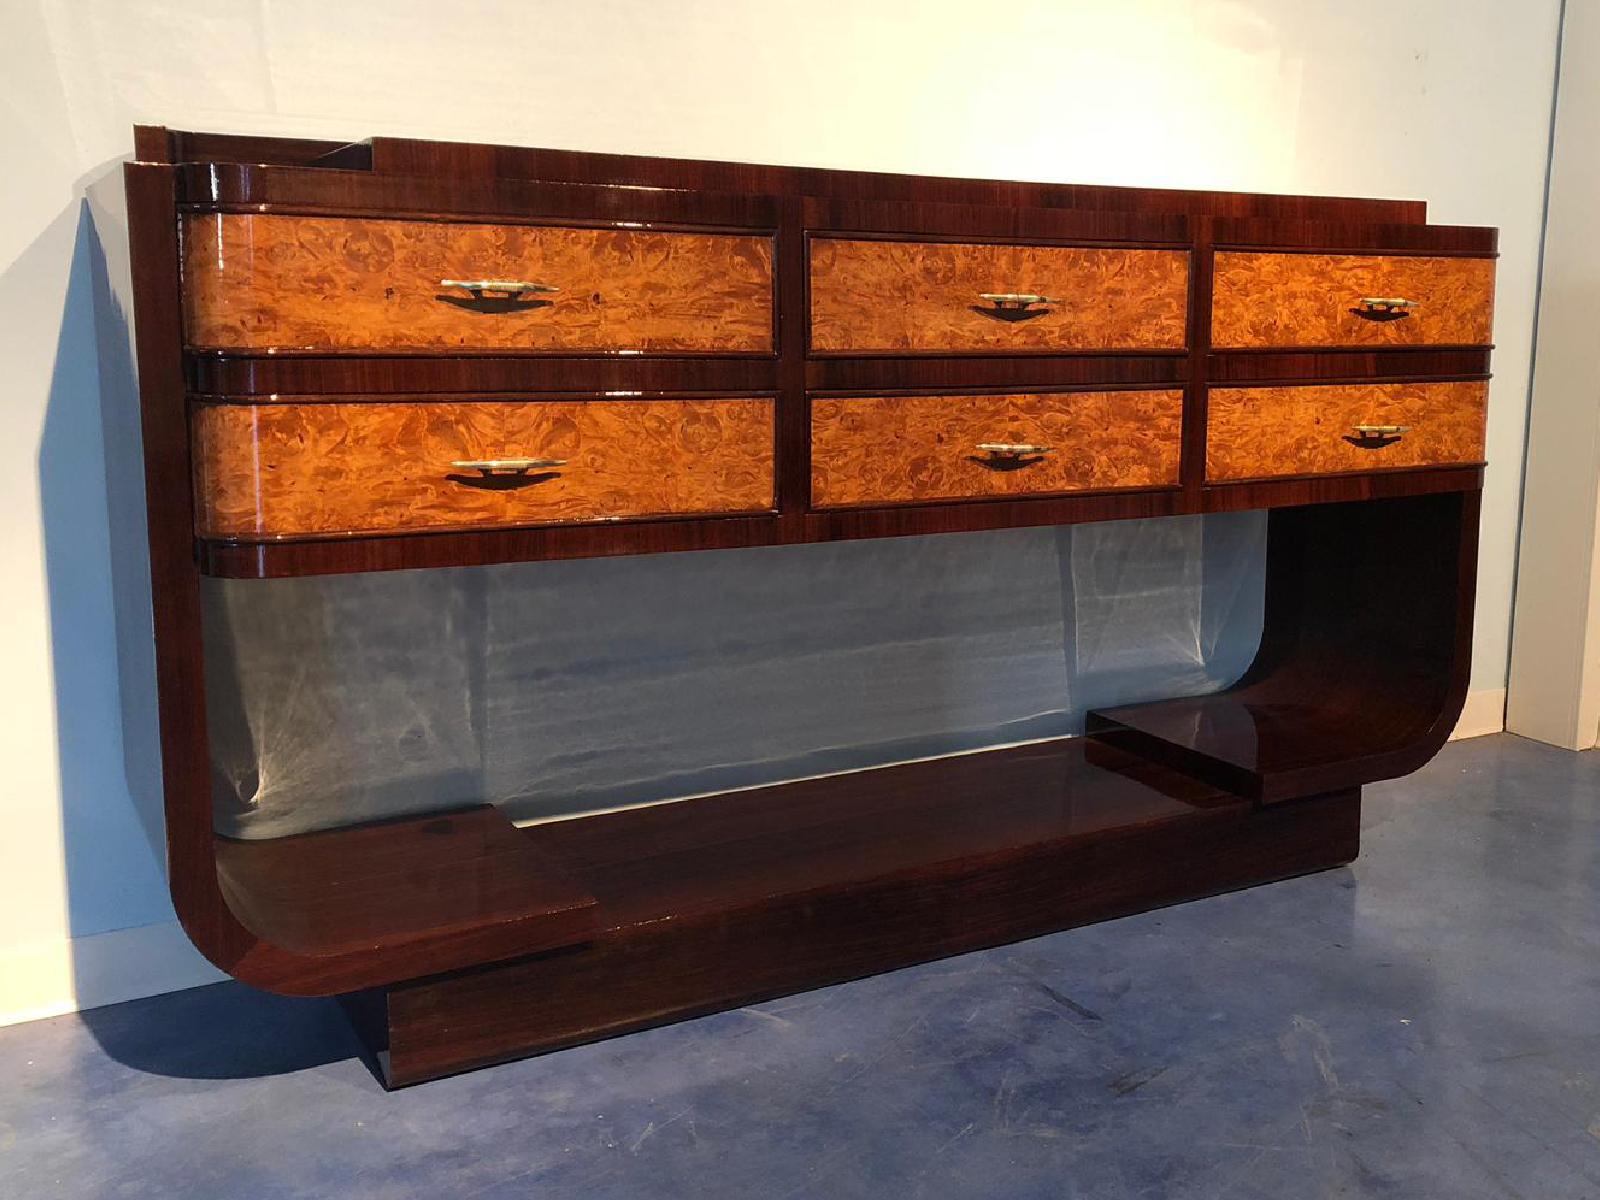 Italian Midcentury Rosewood Sideboard Consolle, 1950 (Art déco)